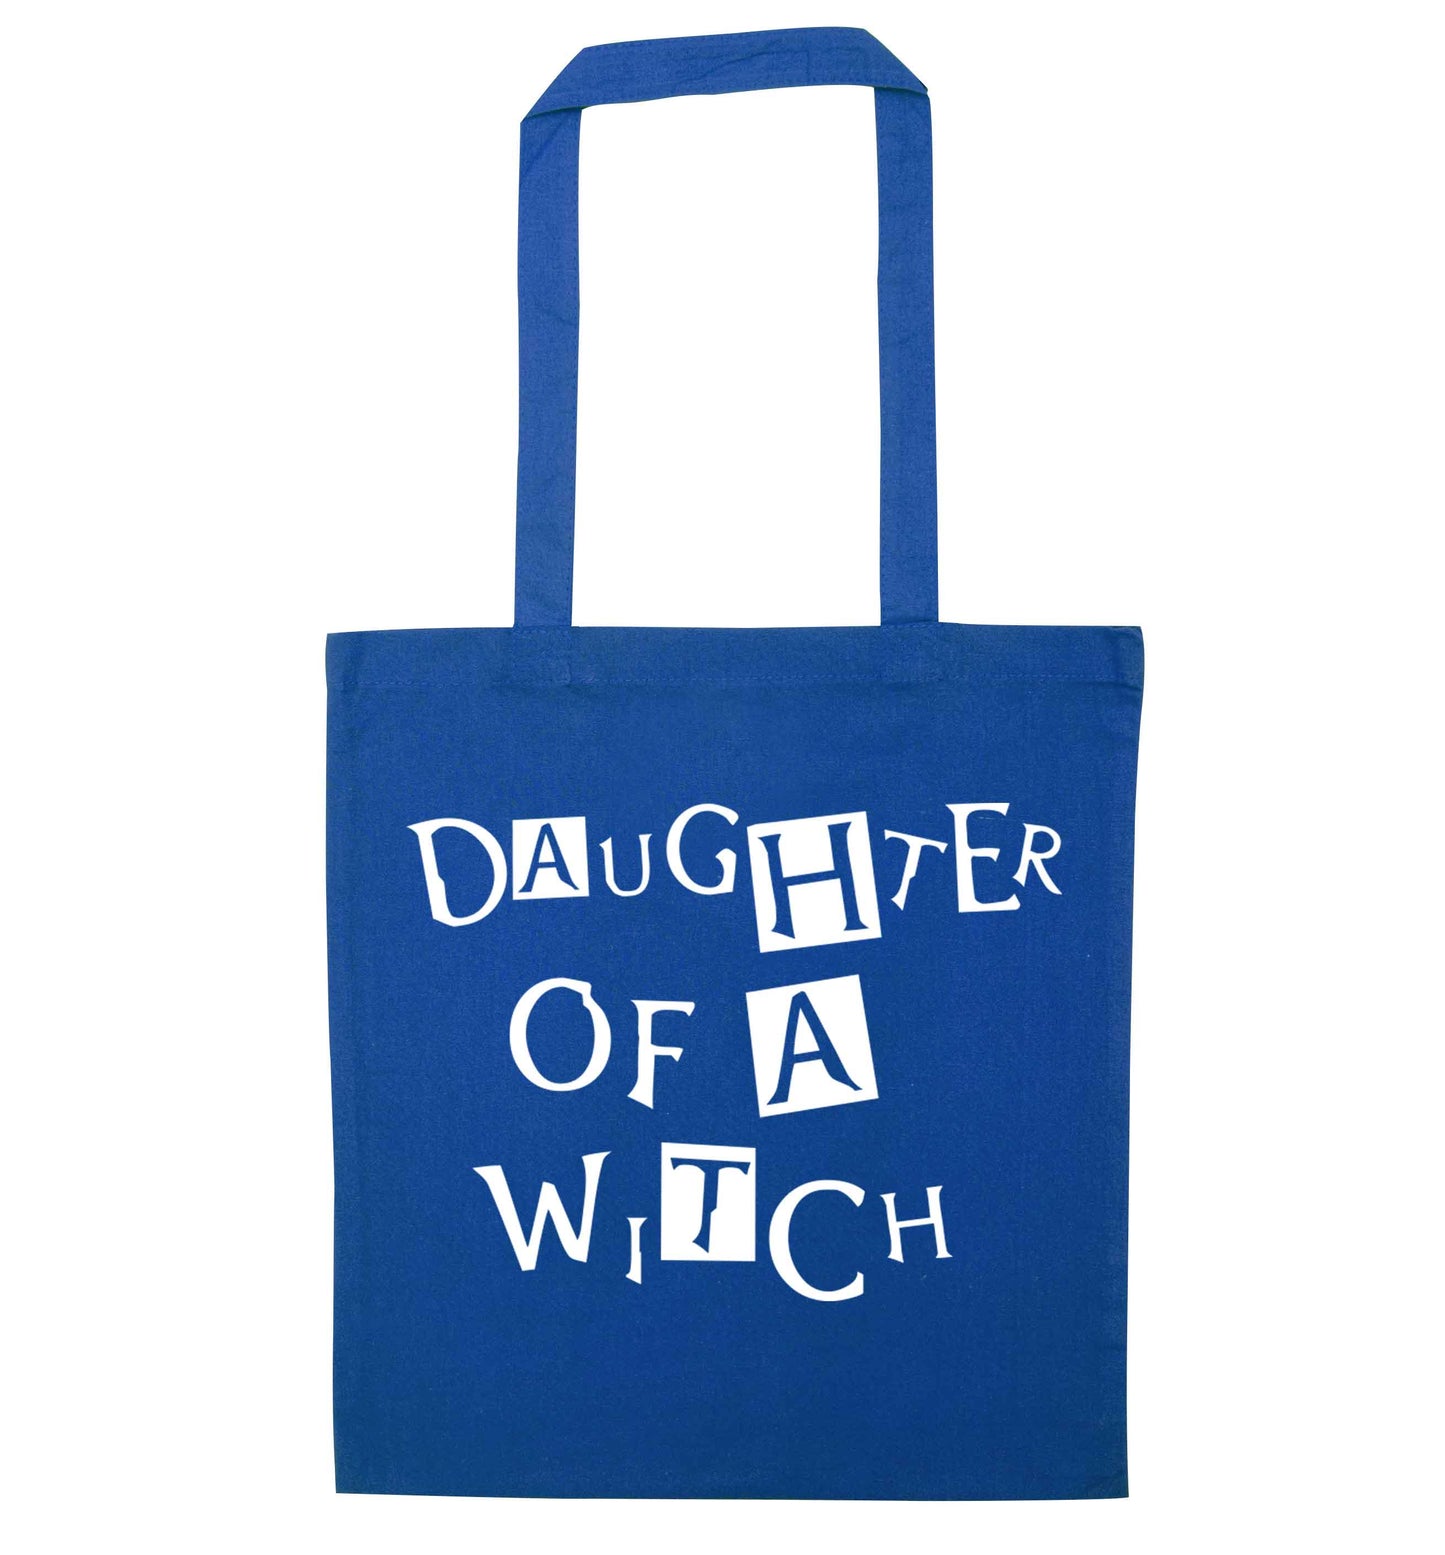 Daughter of a witch blue tote bag